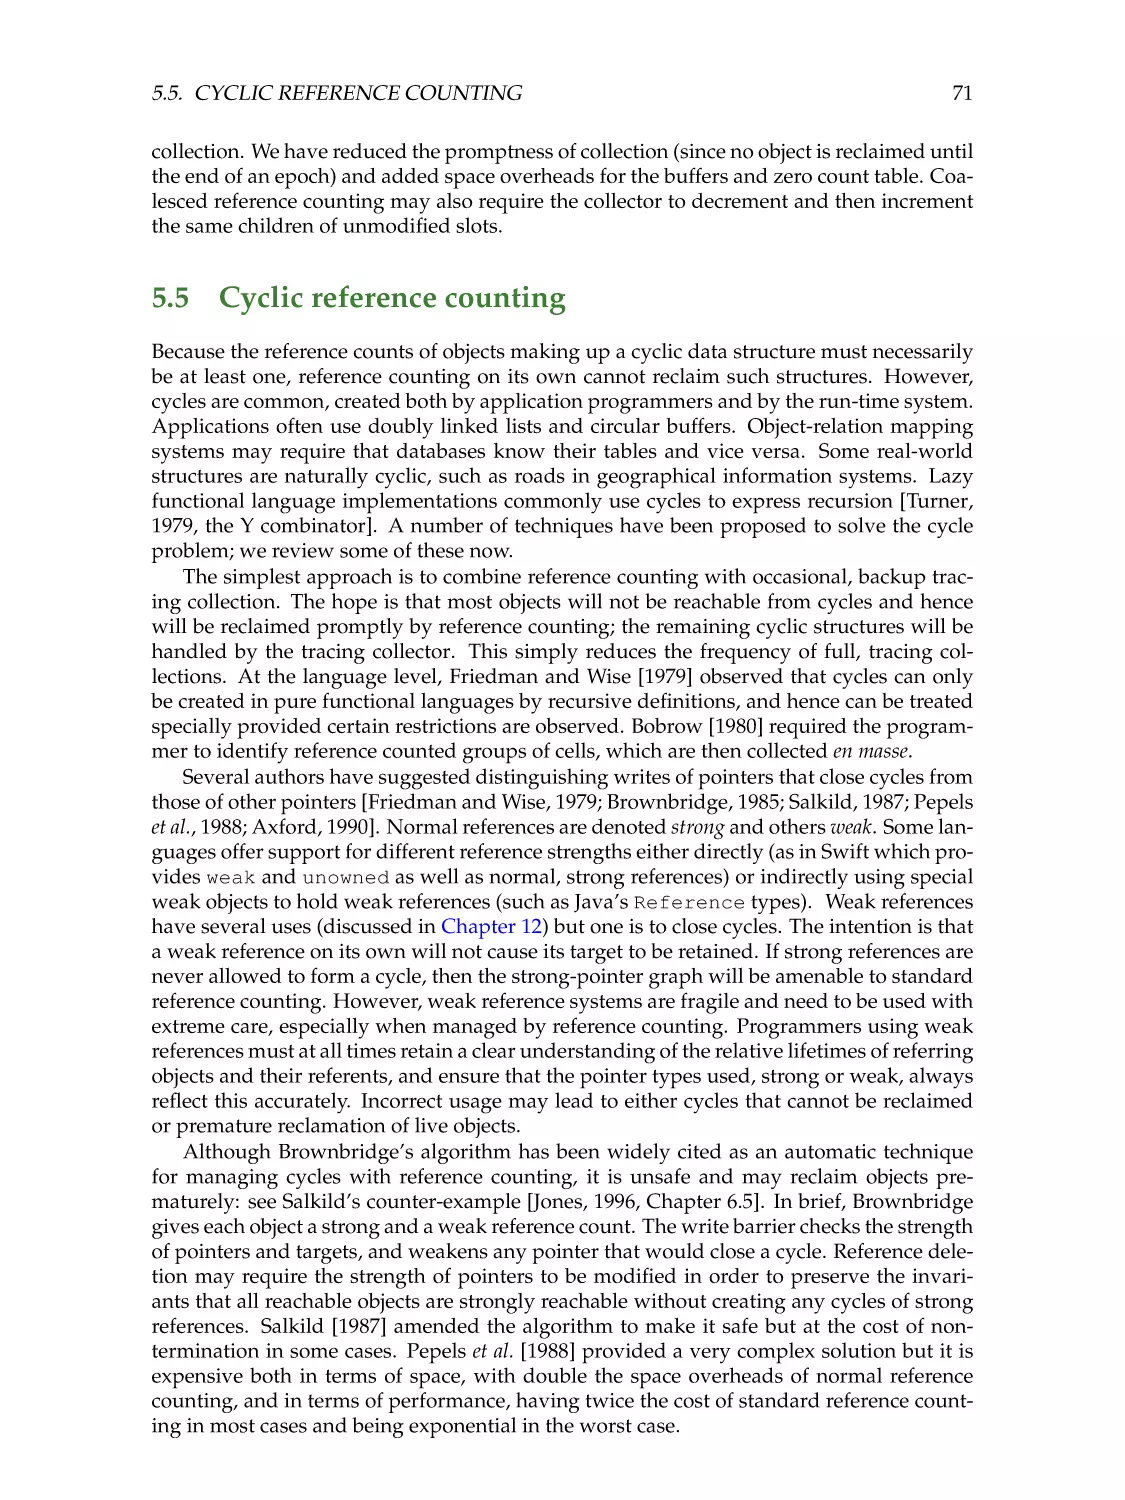 5.5. Cyclic reference counting